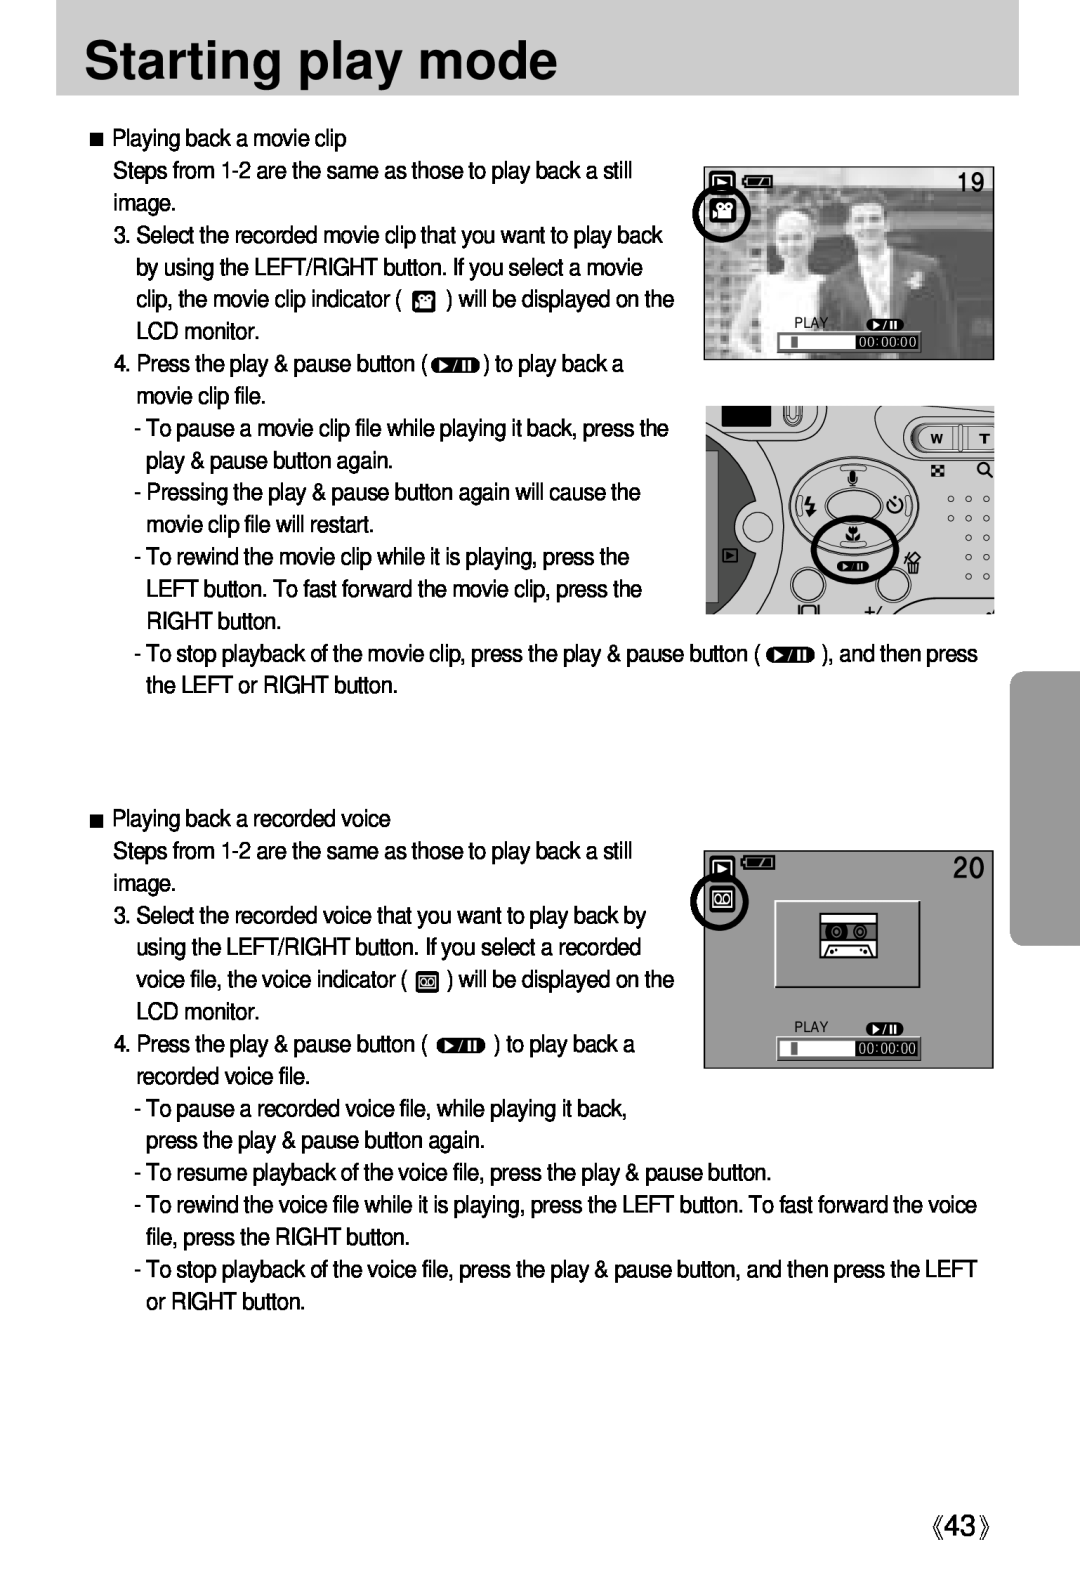 Samsung Digimax U-CA user manual Starting play mode, Steps from 1-2 are the same as those to play back a still 